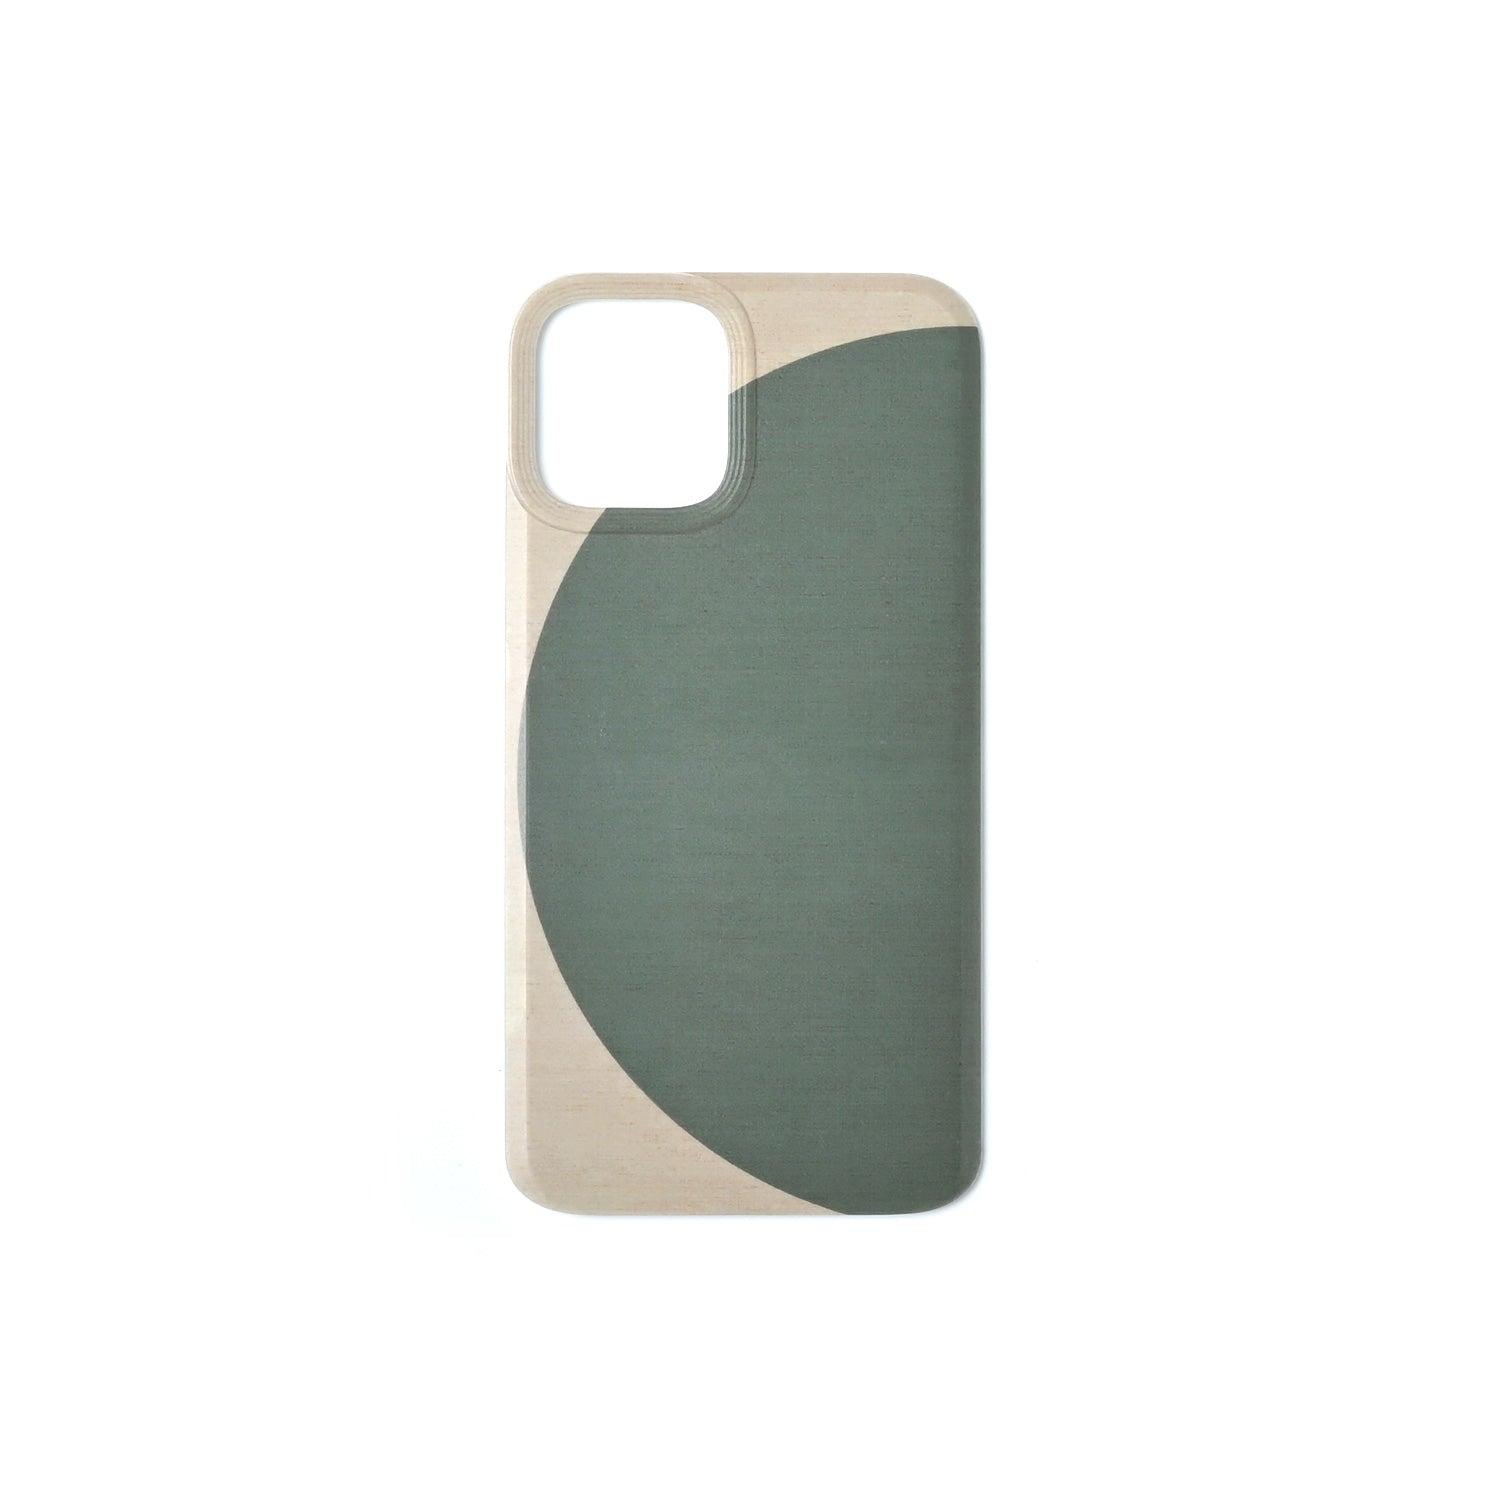 Wander Case for iPhone 12 Series - Light Blue